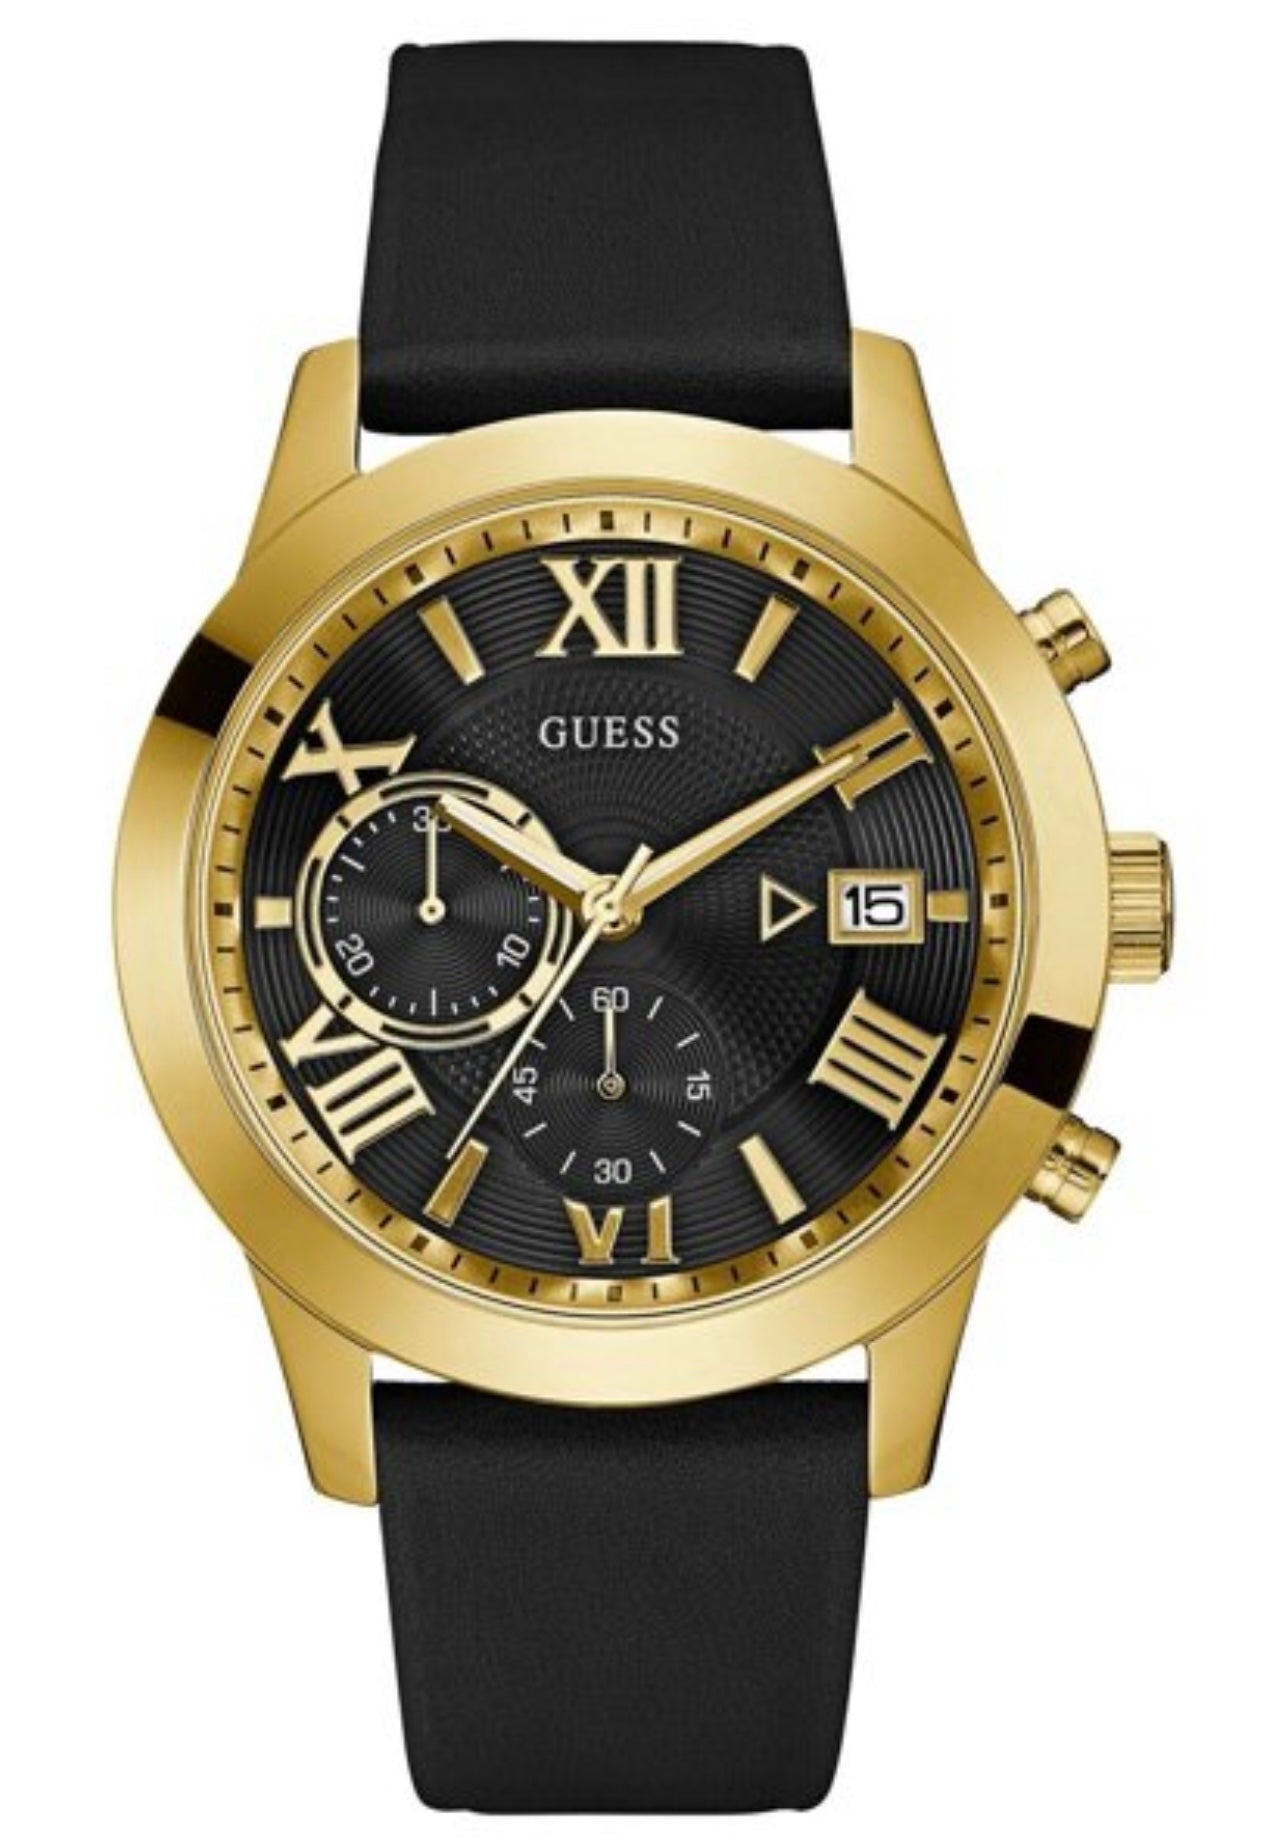 GUESS Classic Black Genuine Leather Chronograph Watch with Date U0669G4